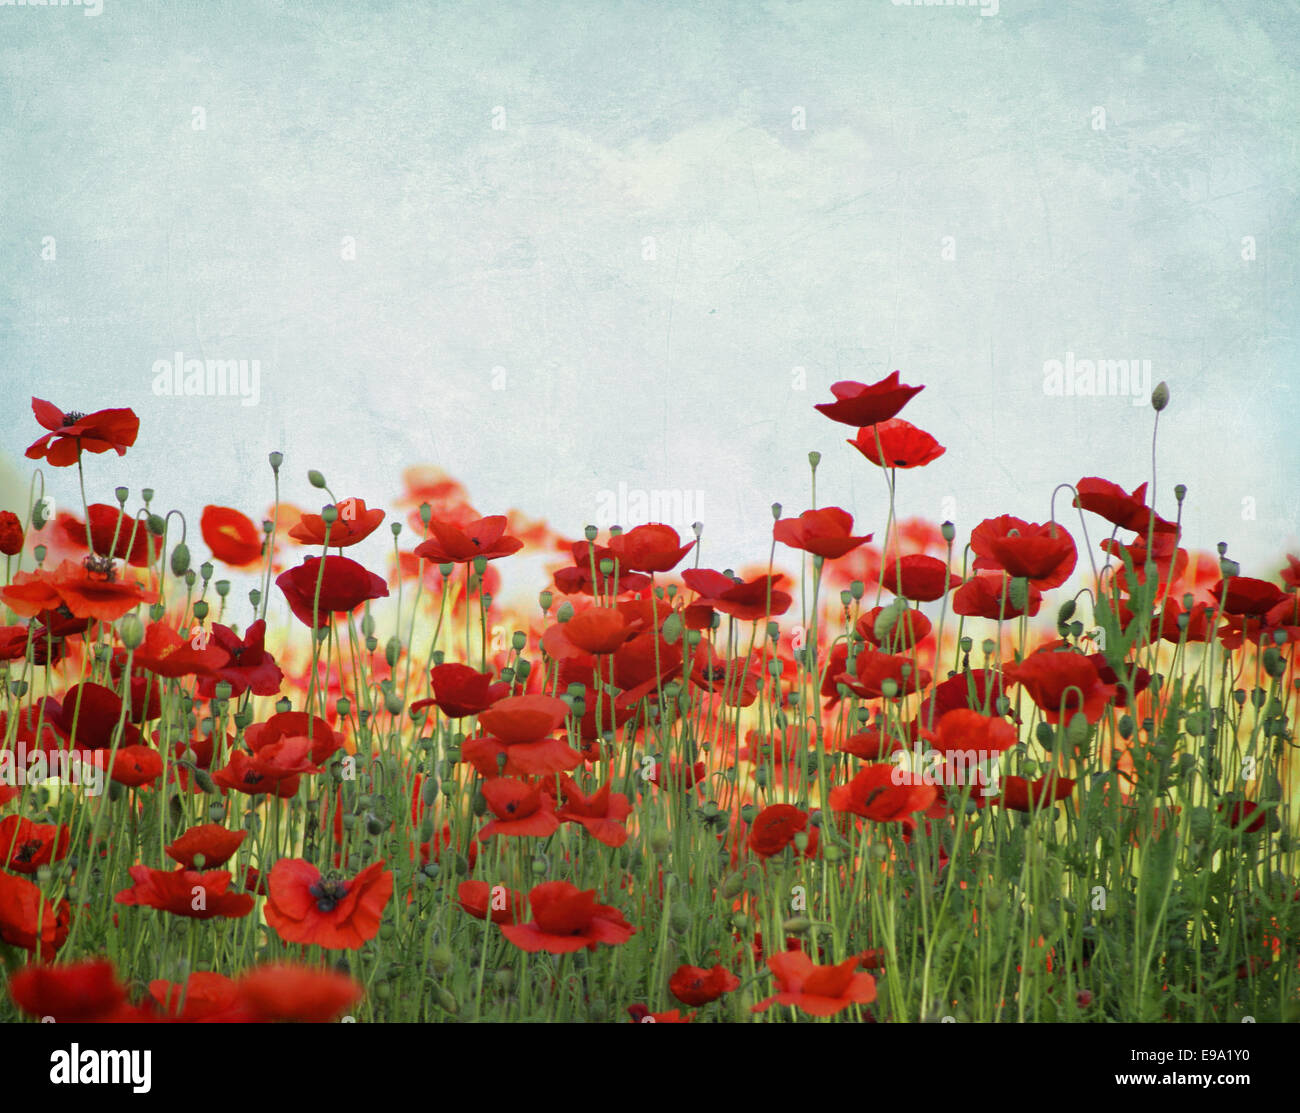 retro poppies on a summer meadow Stock Photo